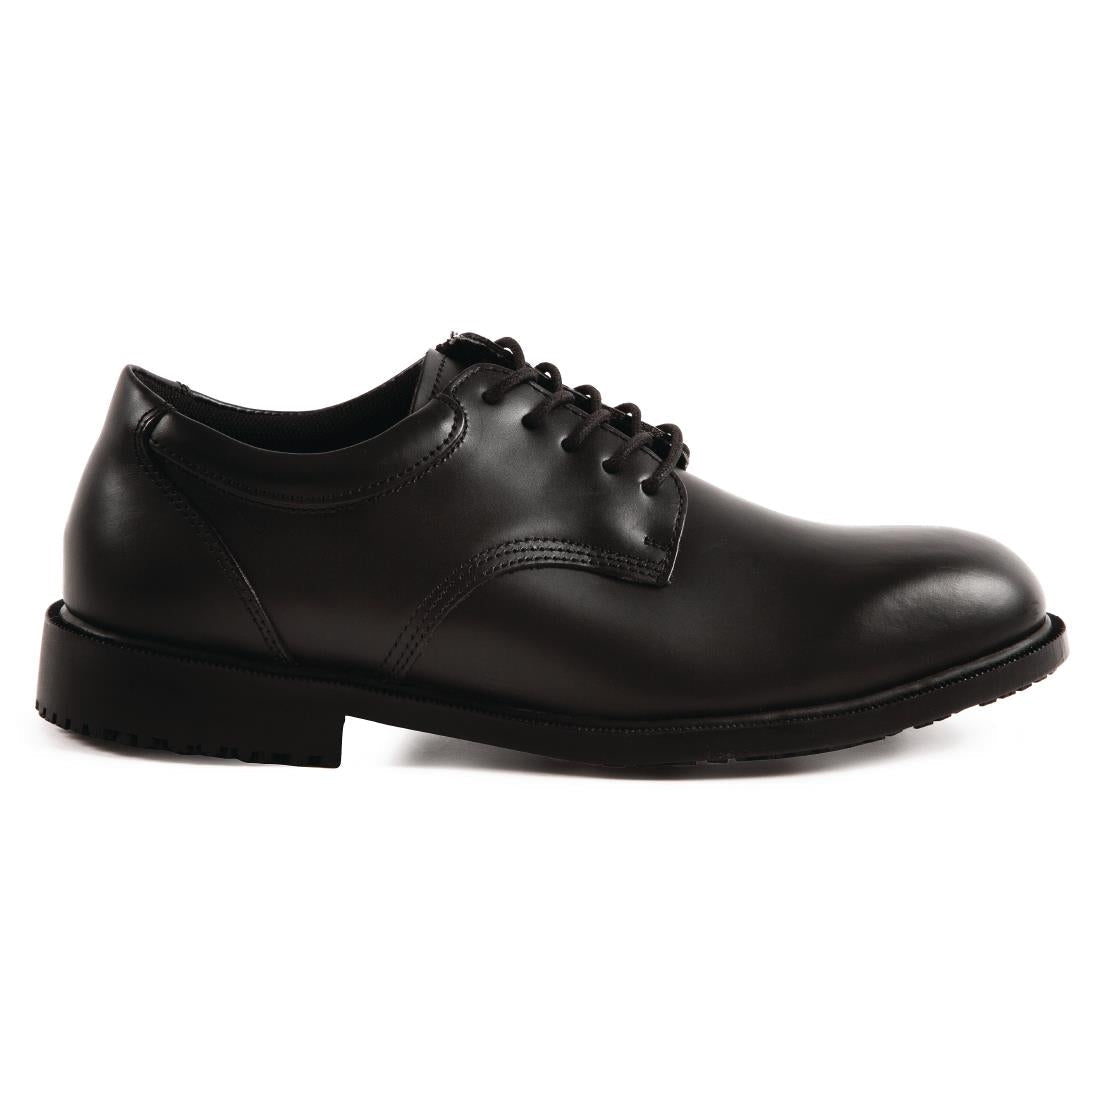 B110-48 Shoes For Crews Mens Dress Shoe Size 48 JD Catering Equipment Solutions Ltd